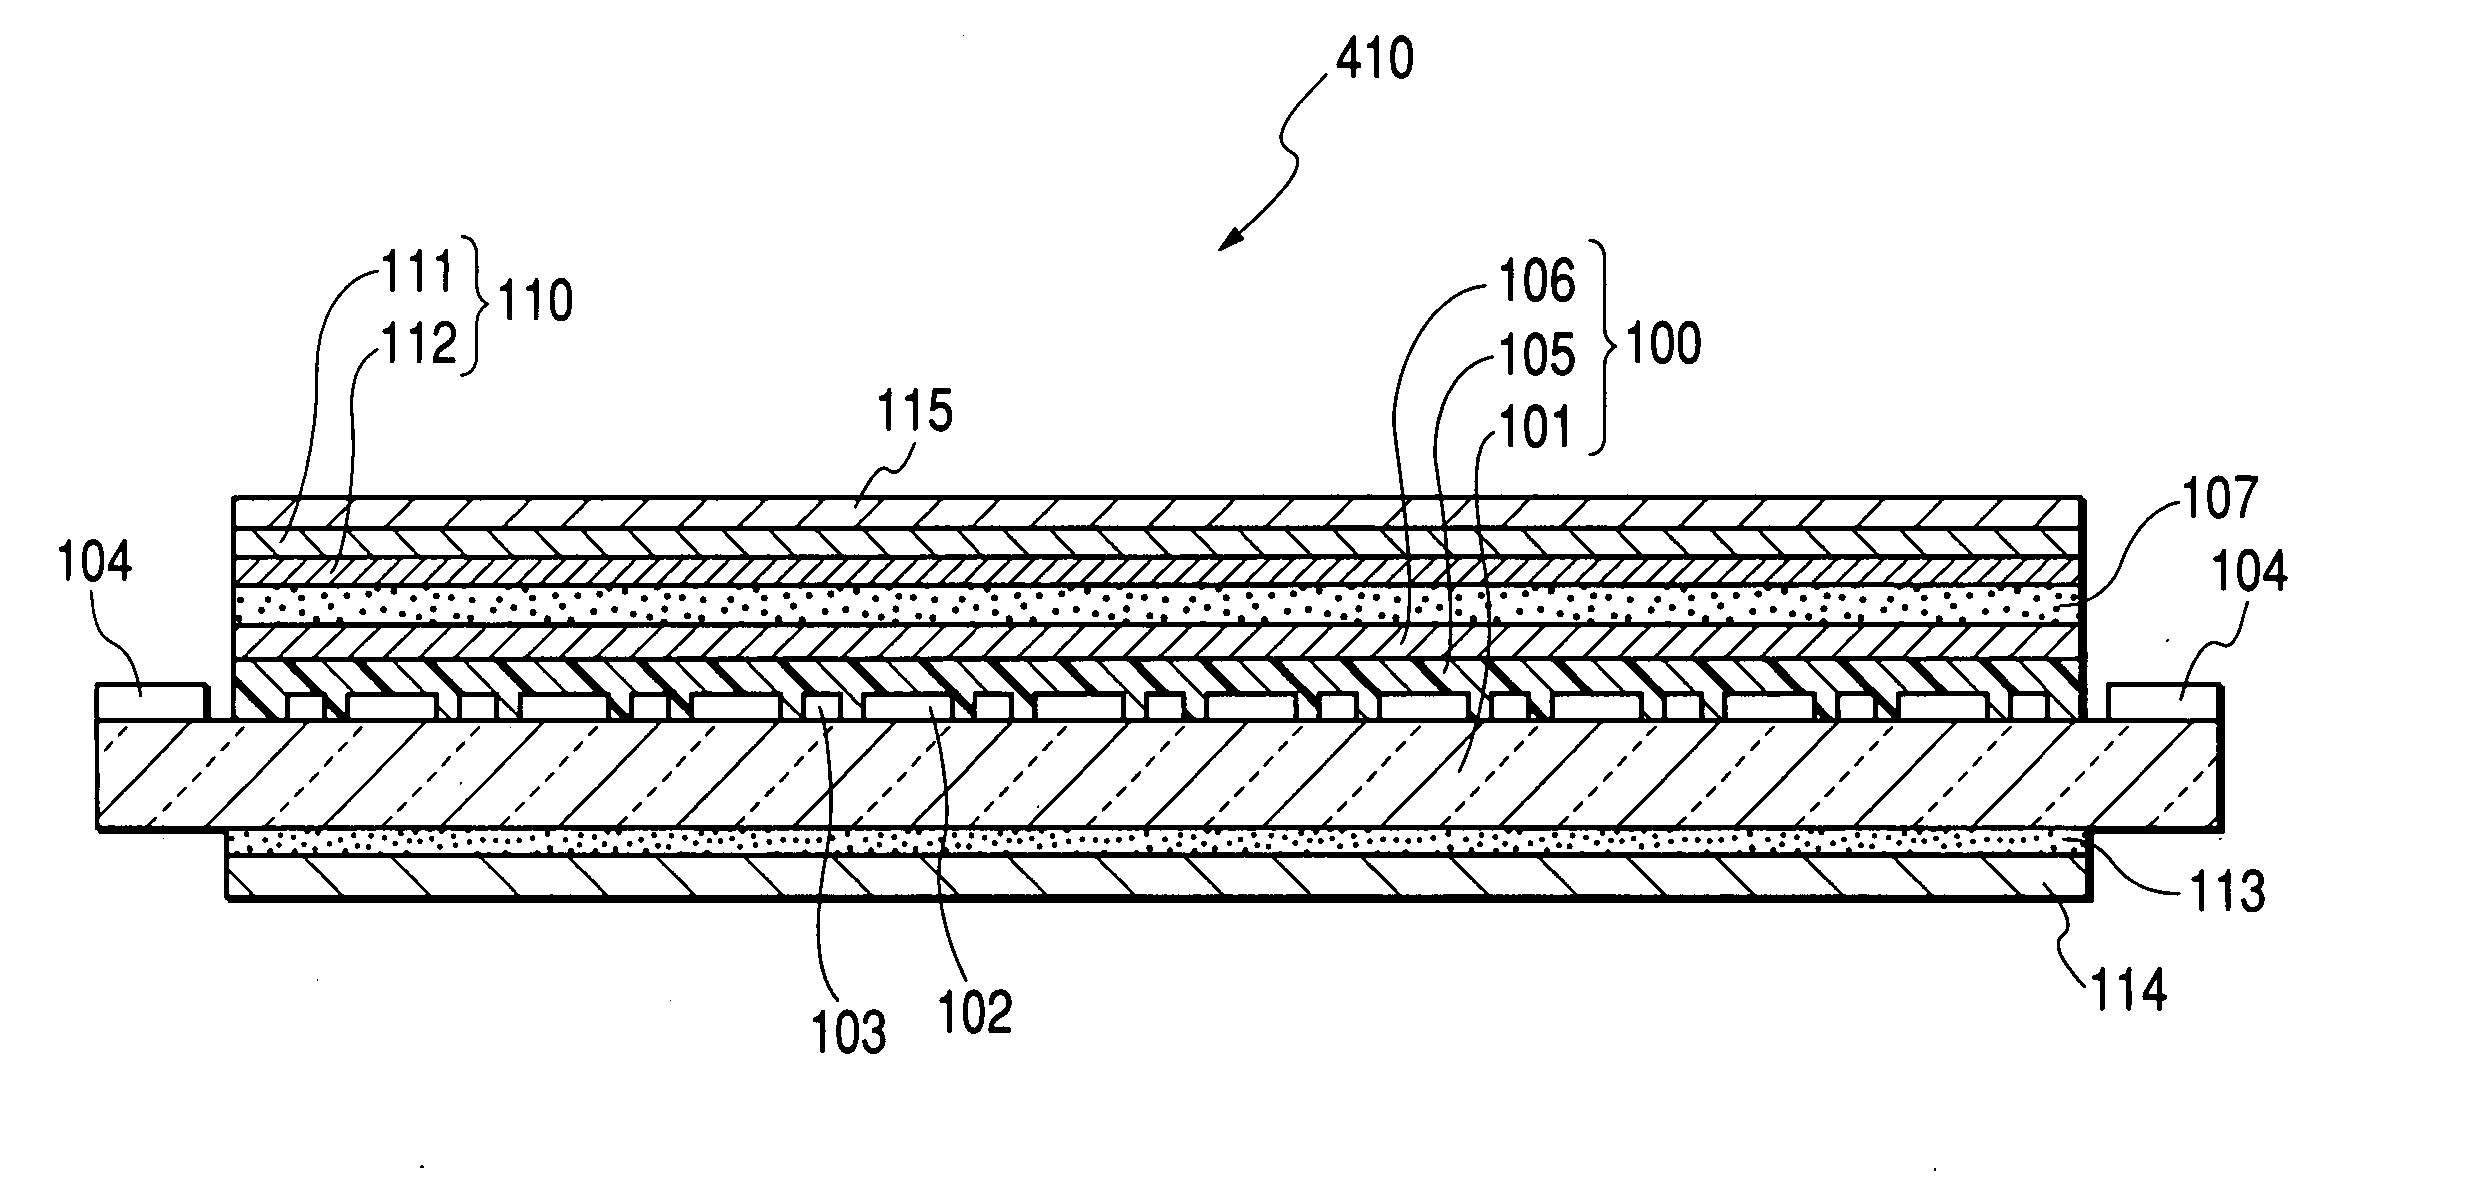 Radiation detecting device and method of manufacturing the same